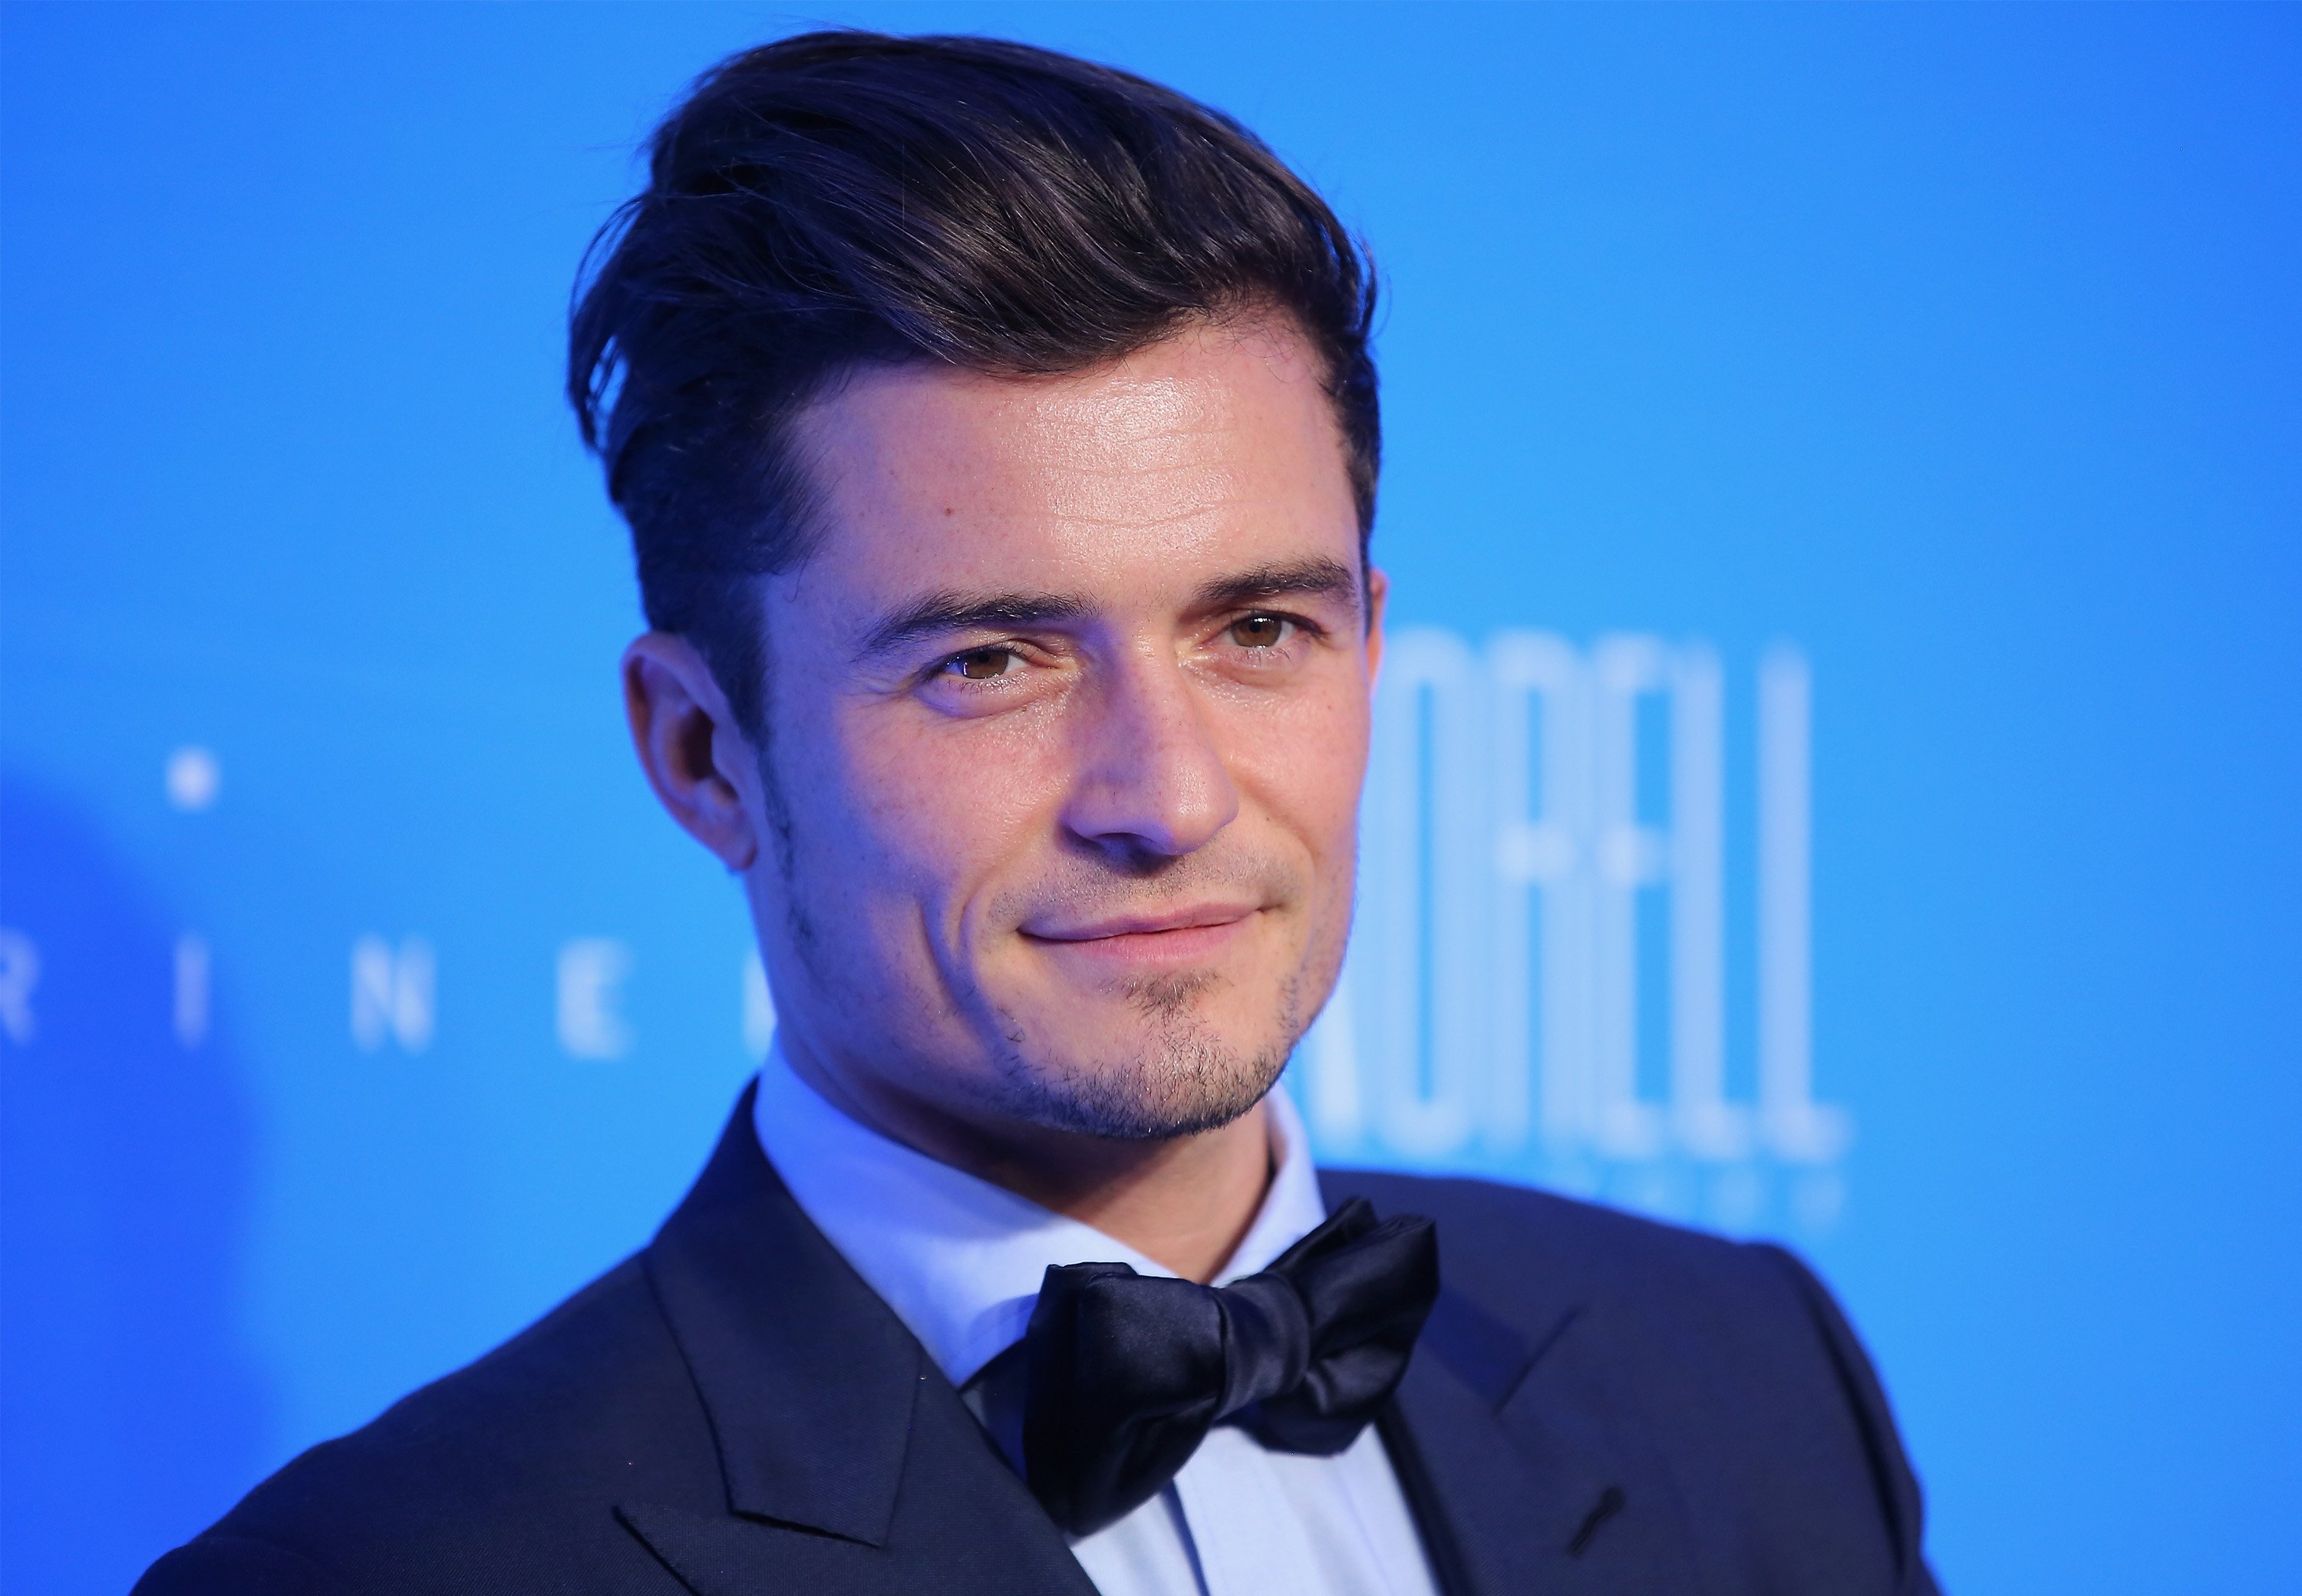 Honoree Orlando Bloom attends the 11th Annual Unicef Snowflake Ball at Cipriani Wall Street on December 1, 2015, in New York City. | Source: Getty Images